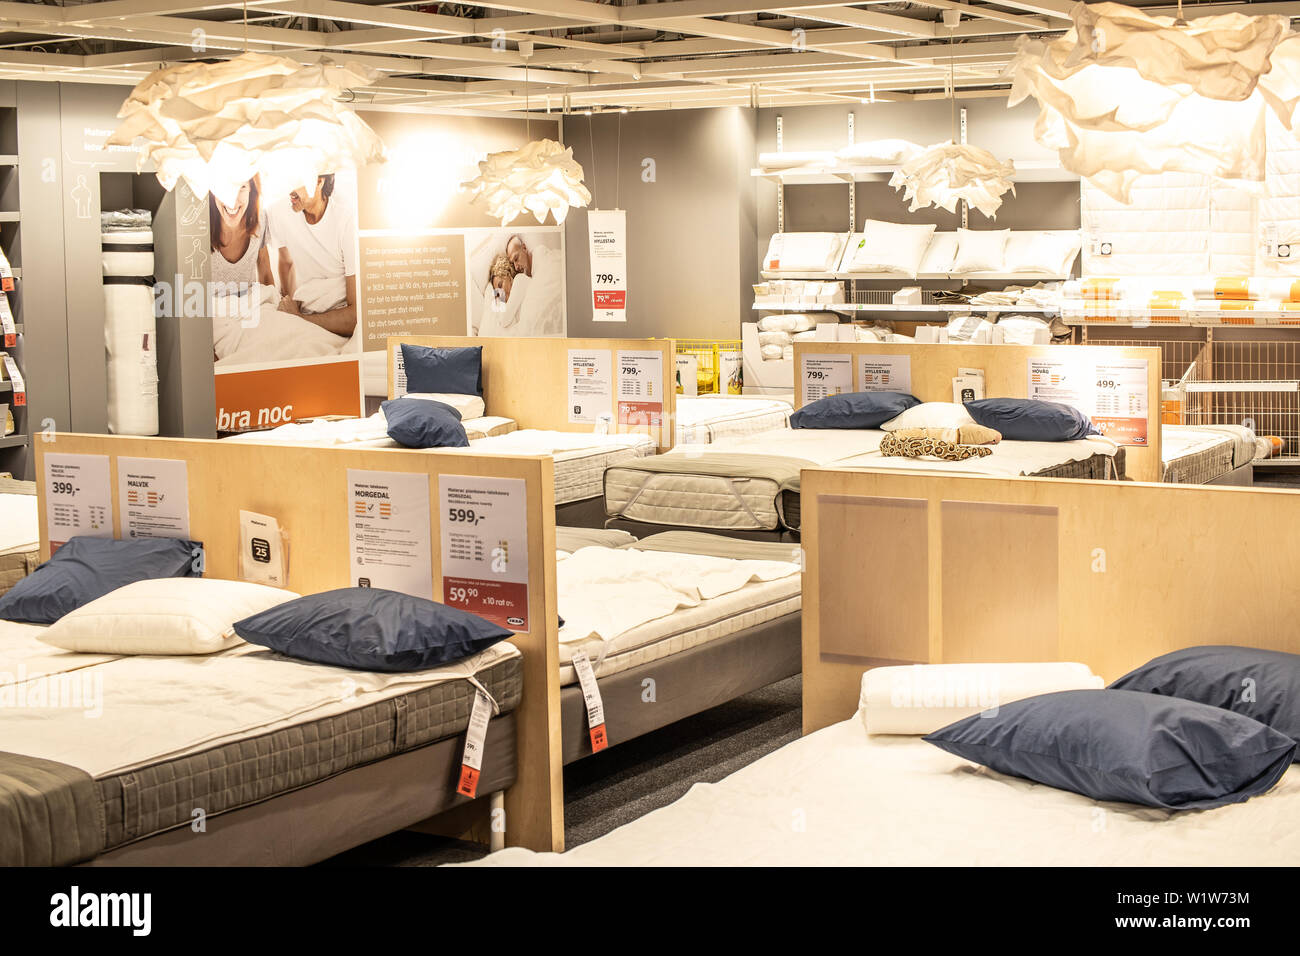 Lodz, Poland, Jan 2019 exhibition interior IKEA store. bed in modern  bedroom. IKEA sells ready-to-assemble furniture, appliances, home  accessories Stock Photo - Alamy